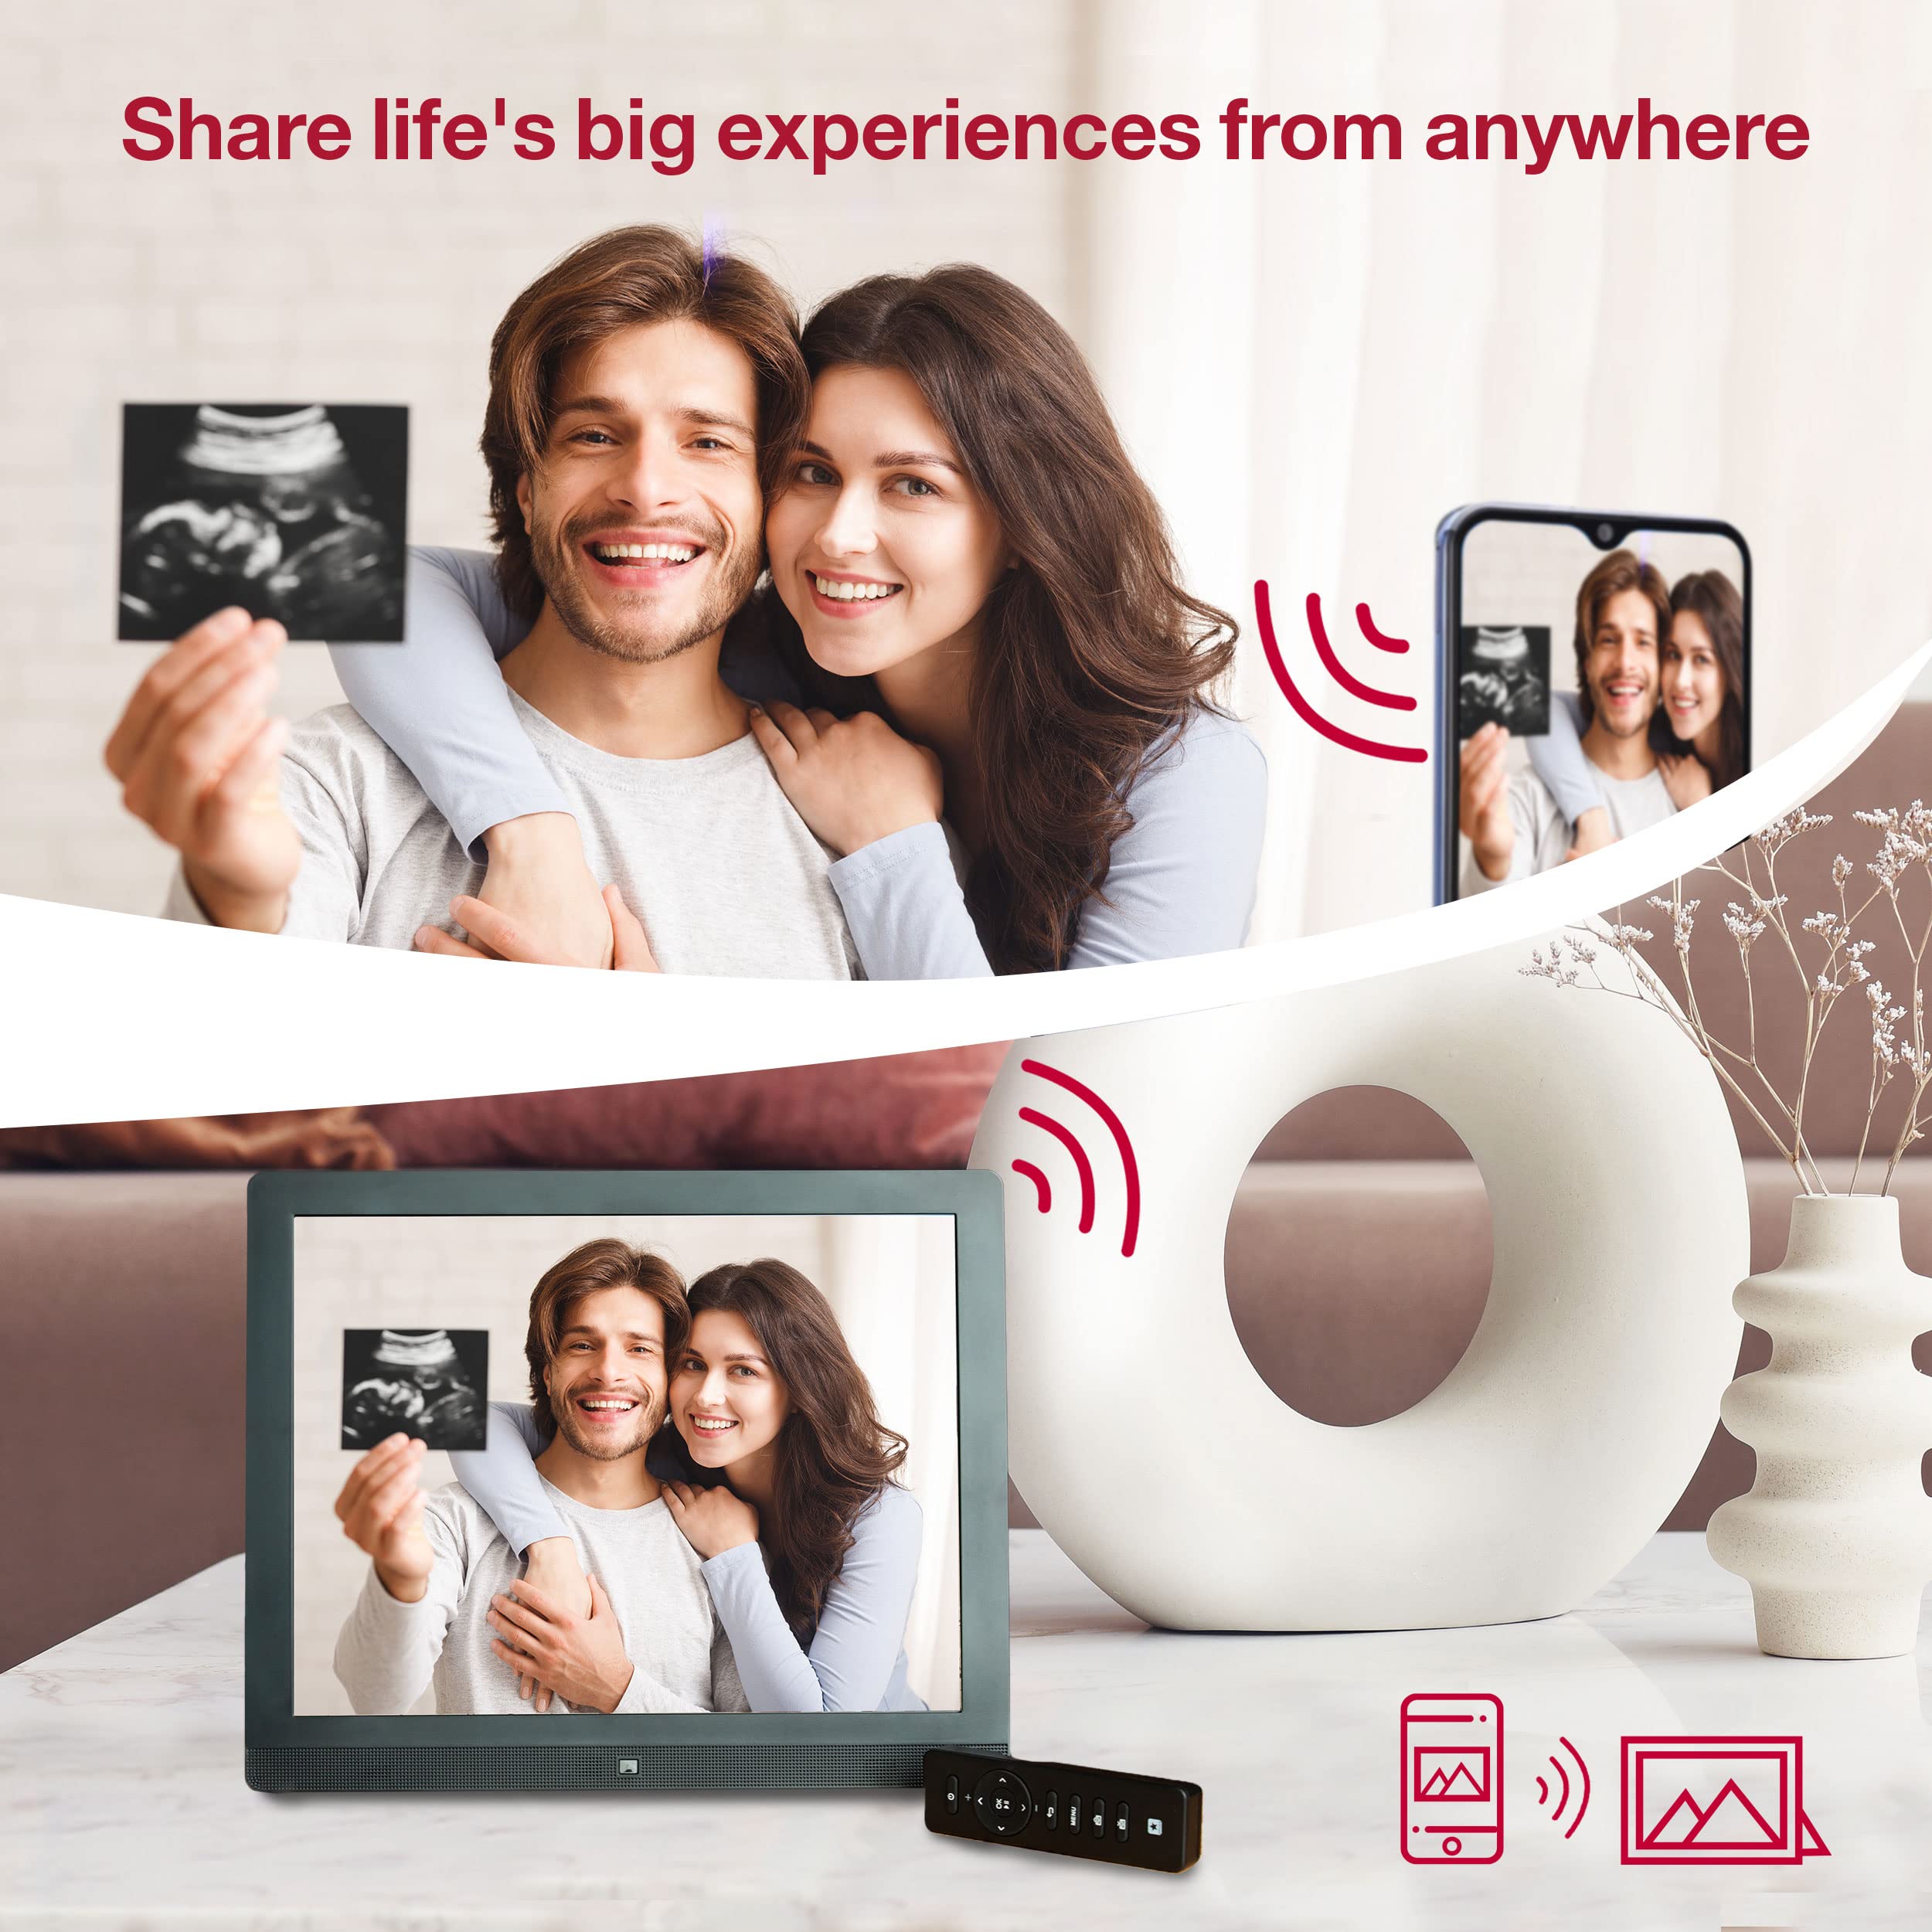 Pix-Star 10 inch WiFi Digital Picture Frame, Share Videos and Photos Instantly by Email or App, Motion Sensor, IPS Display, Effortless One Minute Setup, Highly Giftable